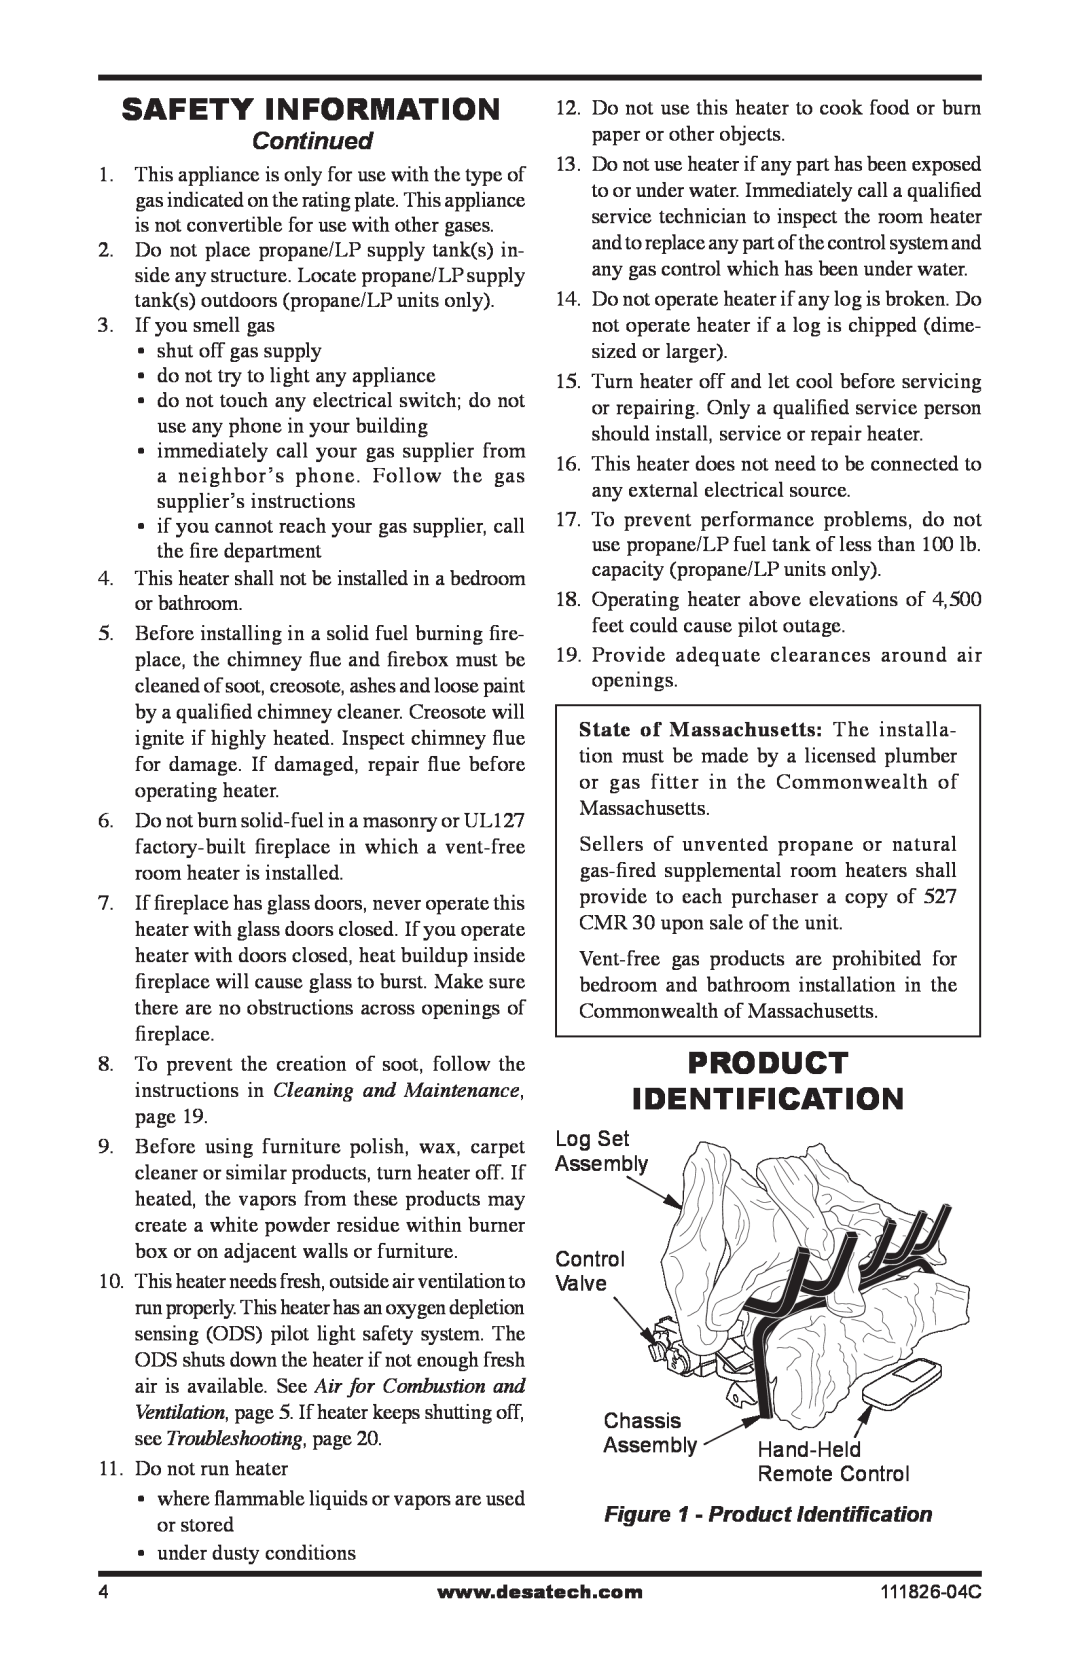 Desa VF-30N-PJD installation manual safety information, Product Identification, Continued 